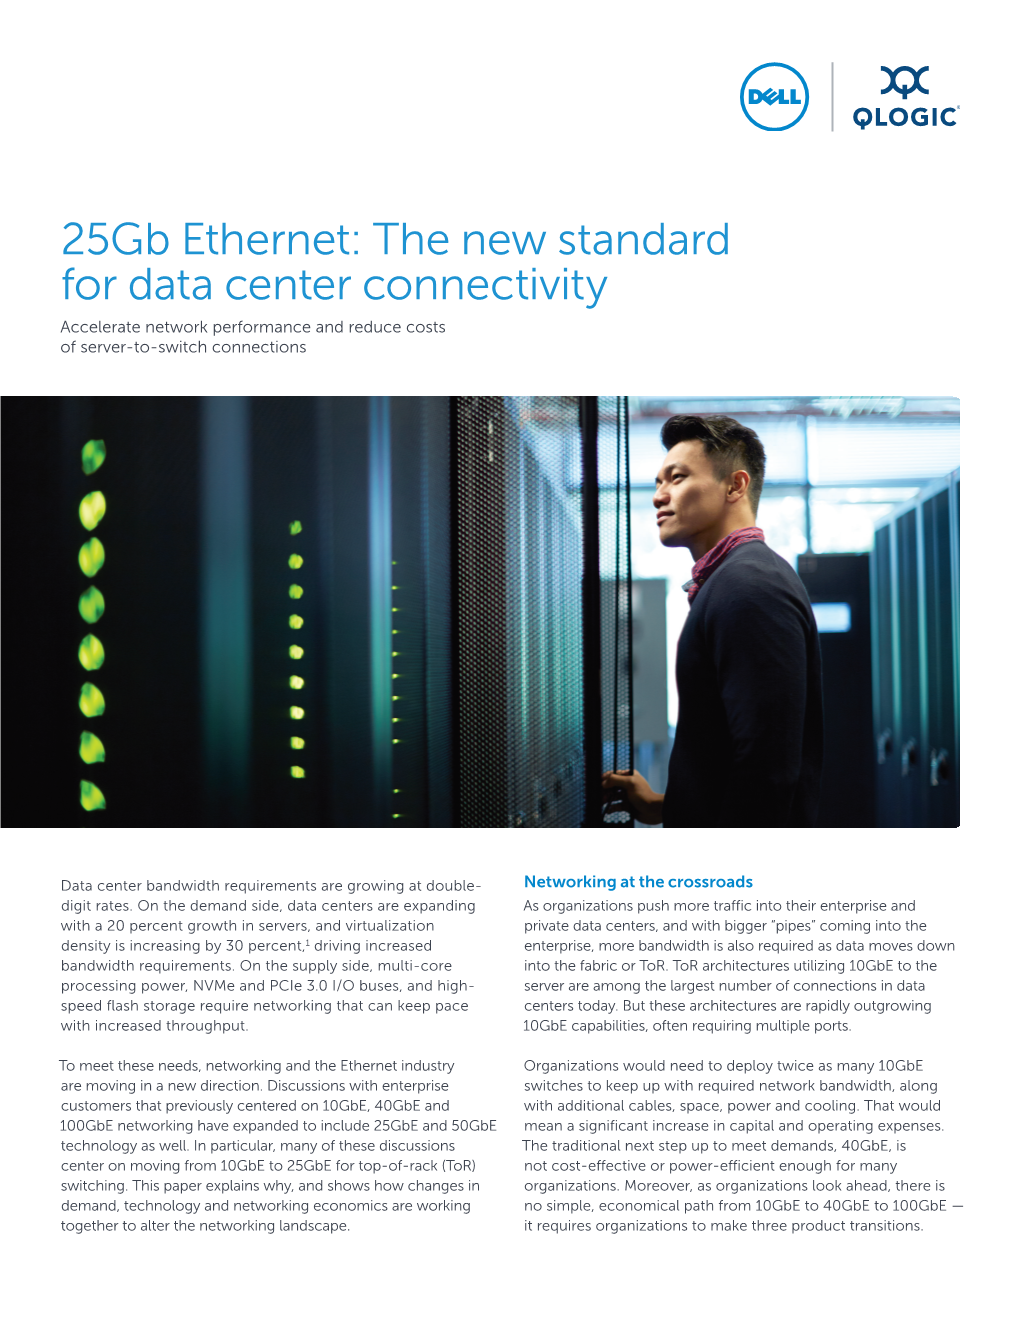 25Gb Ethernet: the New Standard for Data Center Connectivity Accelerate Network Performance and Reduce Costs of Server-To-Switch Connections